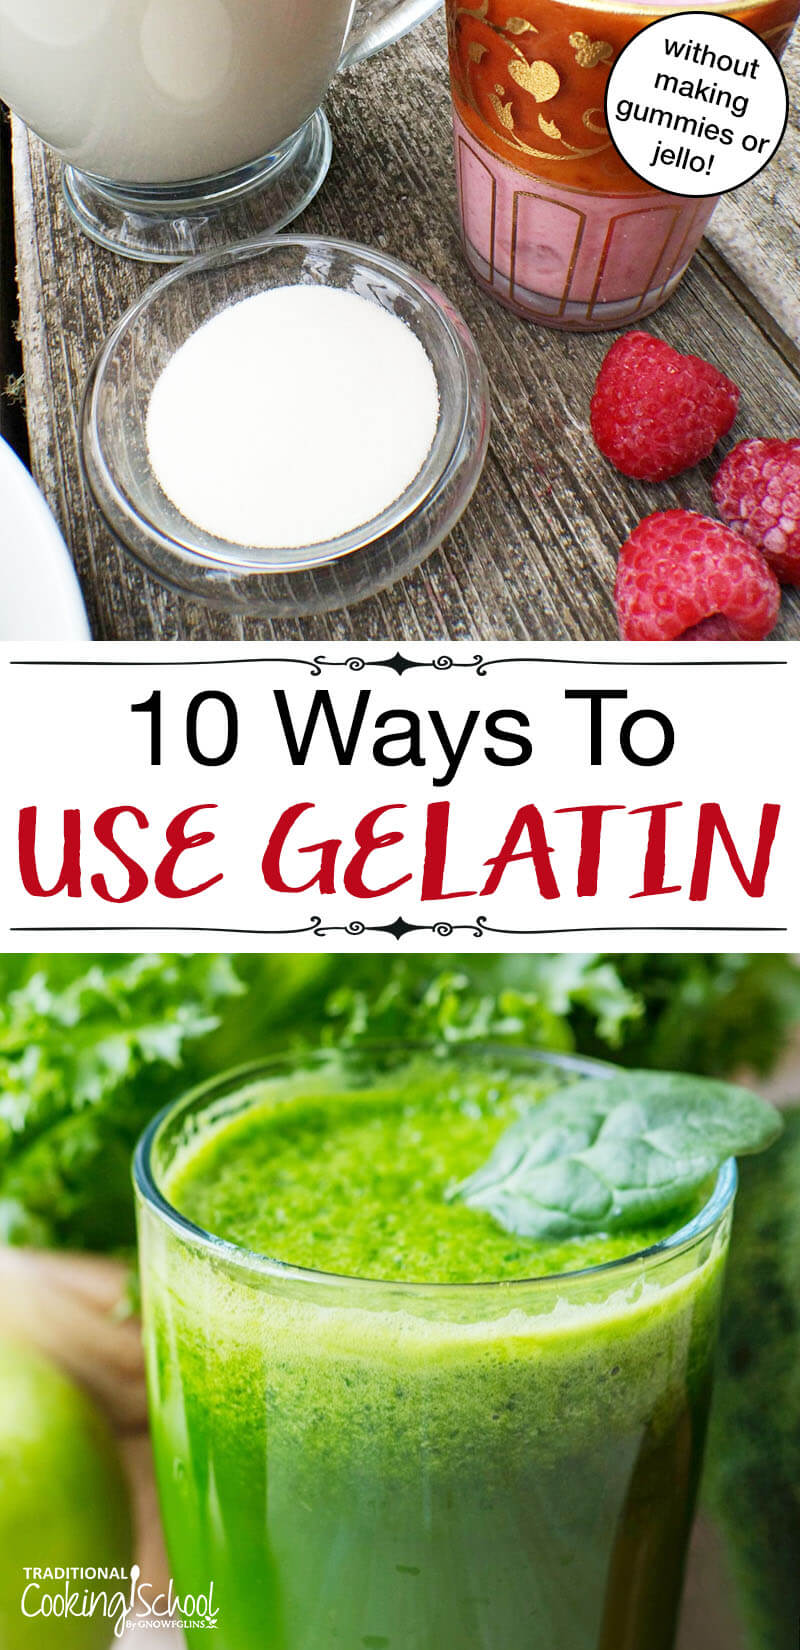 10 Gelatin Benefits + 14 Delicious Ways to Eat It Daily